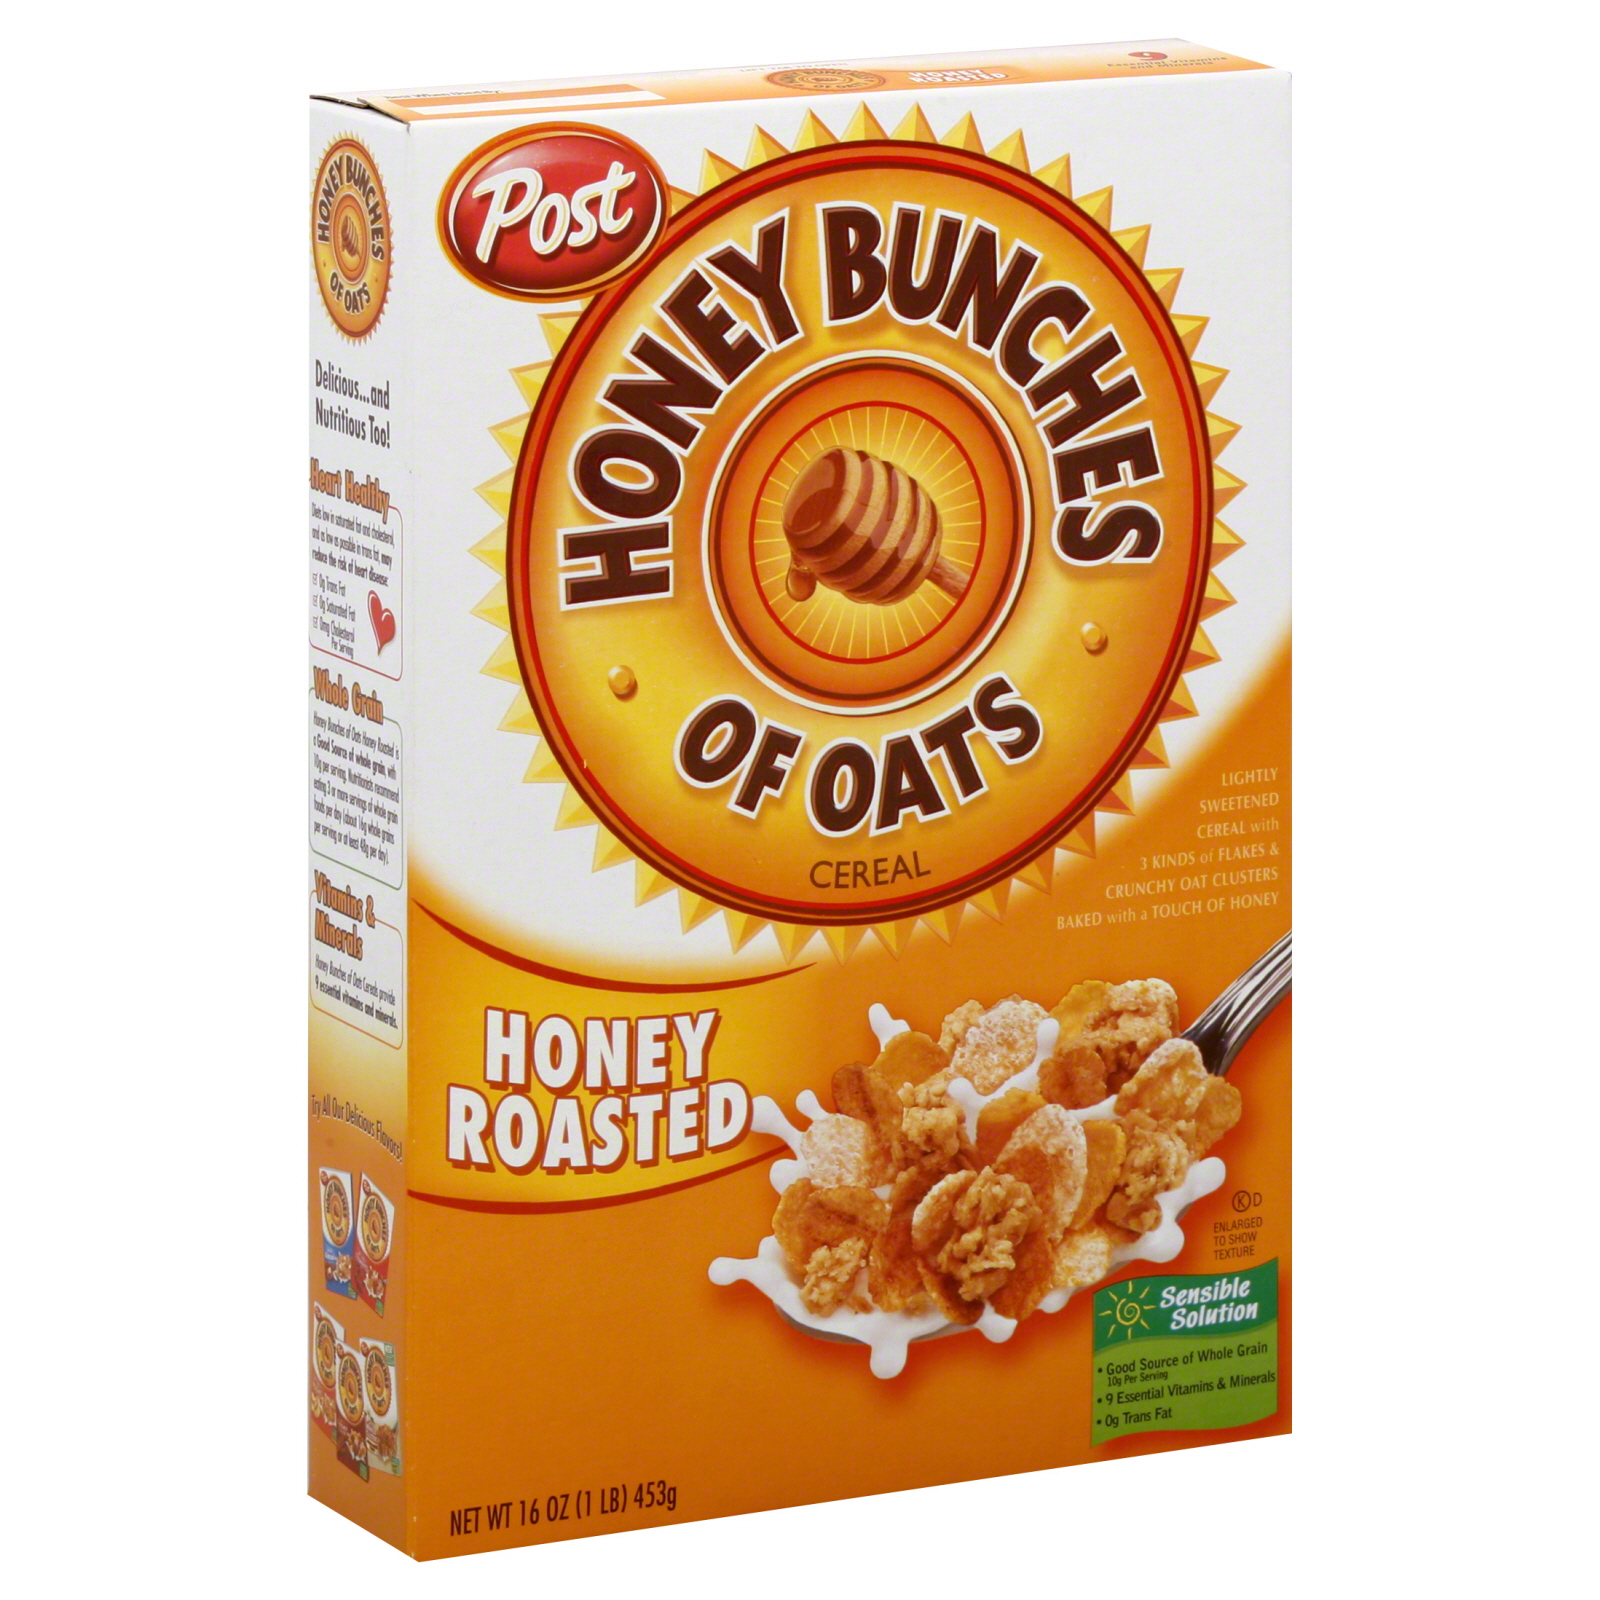 Post Honey Bunches of Oats Cereal, Honey Roasted, 16 oz (1 lb) 453 g